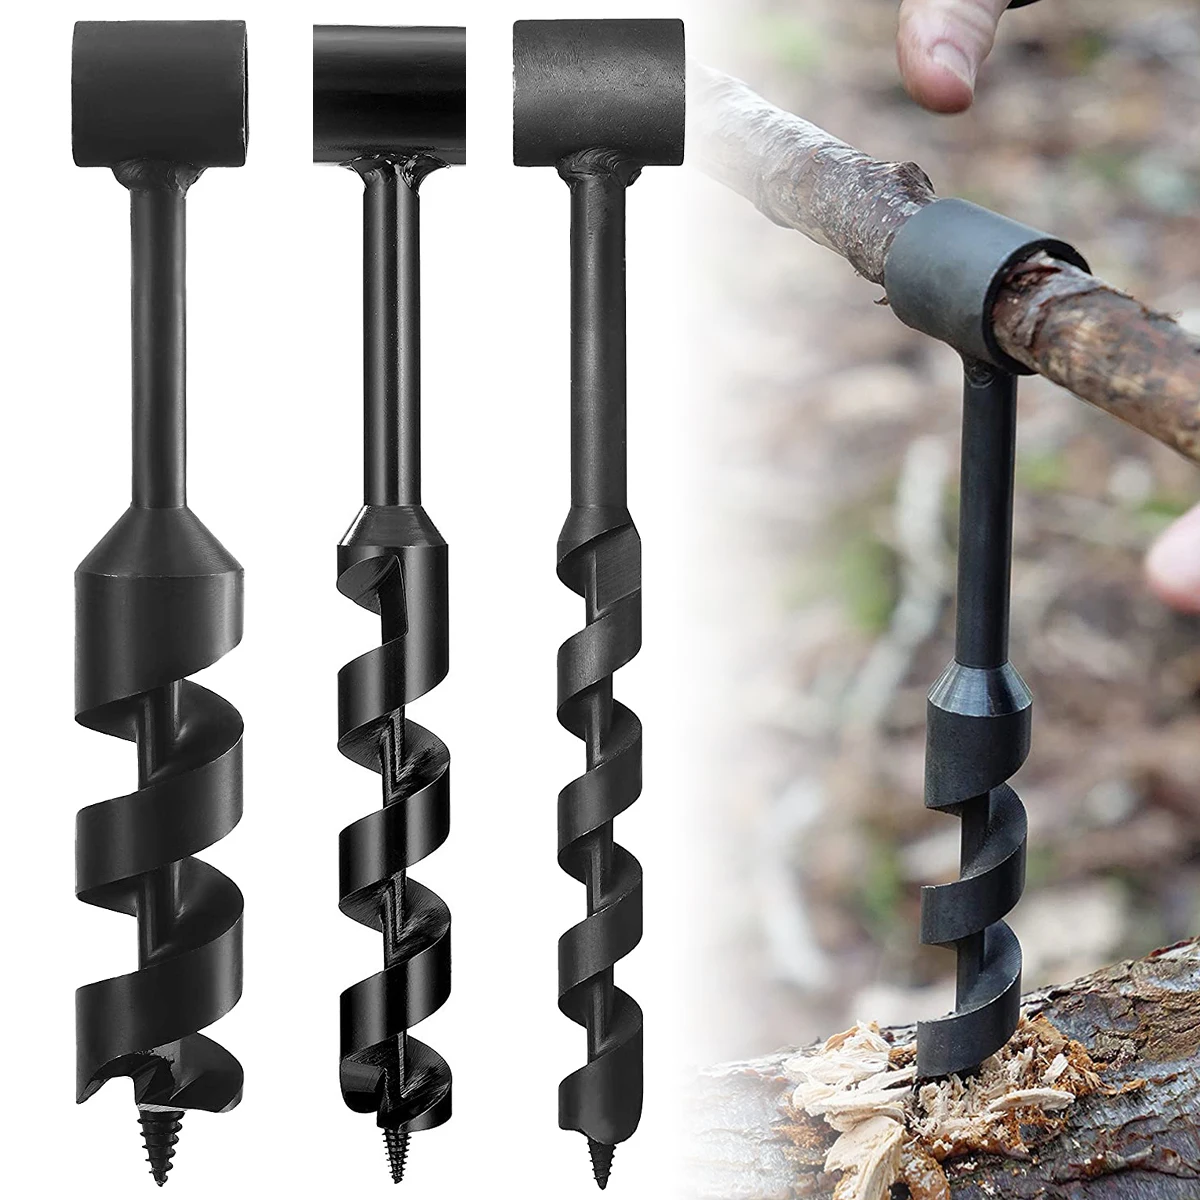 Manual Auger Bushcraft Hand Auger Wrench Wood Drill Peg Tools and Manual Hole Maker Multitool Outdoor Survival Auger Drill Bits